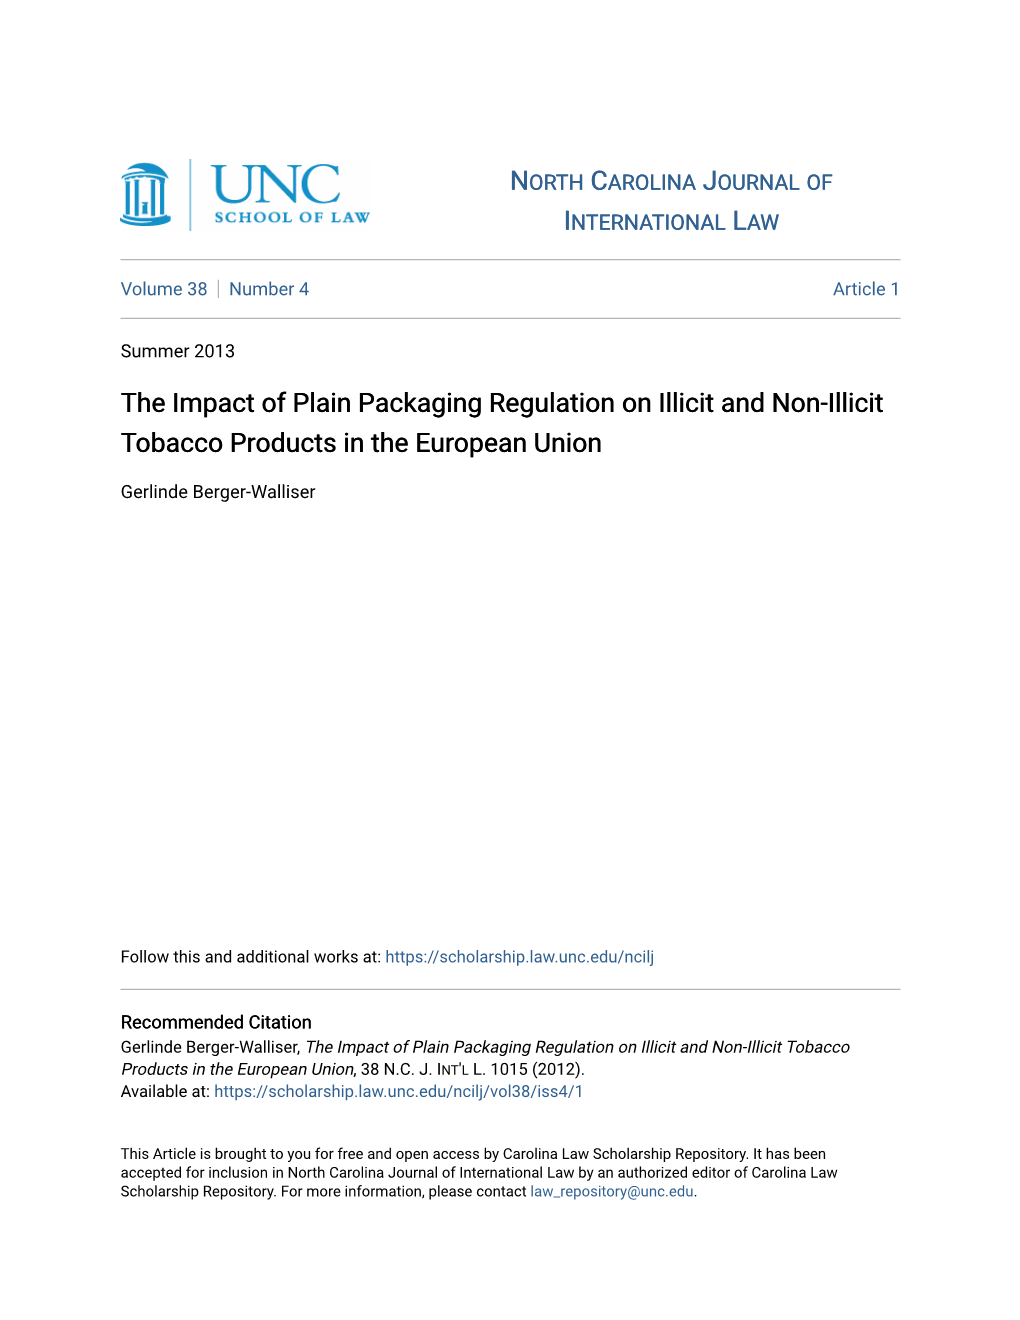 The Impact of Plain Packaging Regulation on Illicit and Non-Illicit Tobacco Products in the European Union